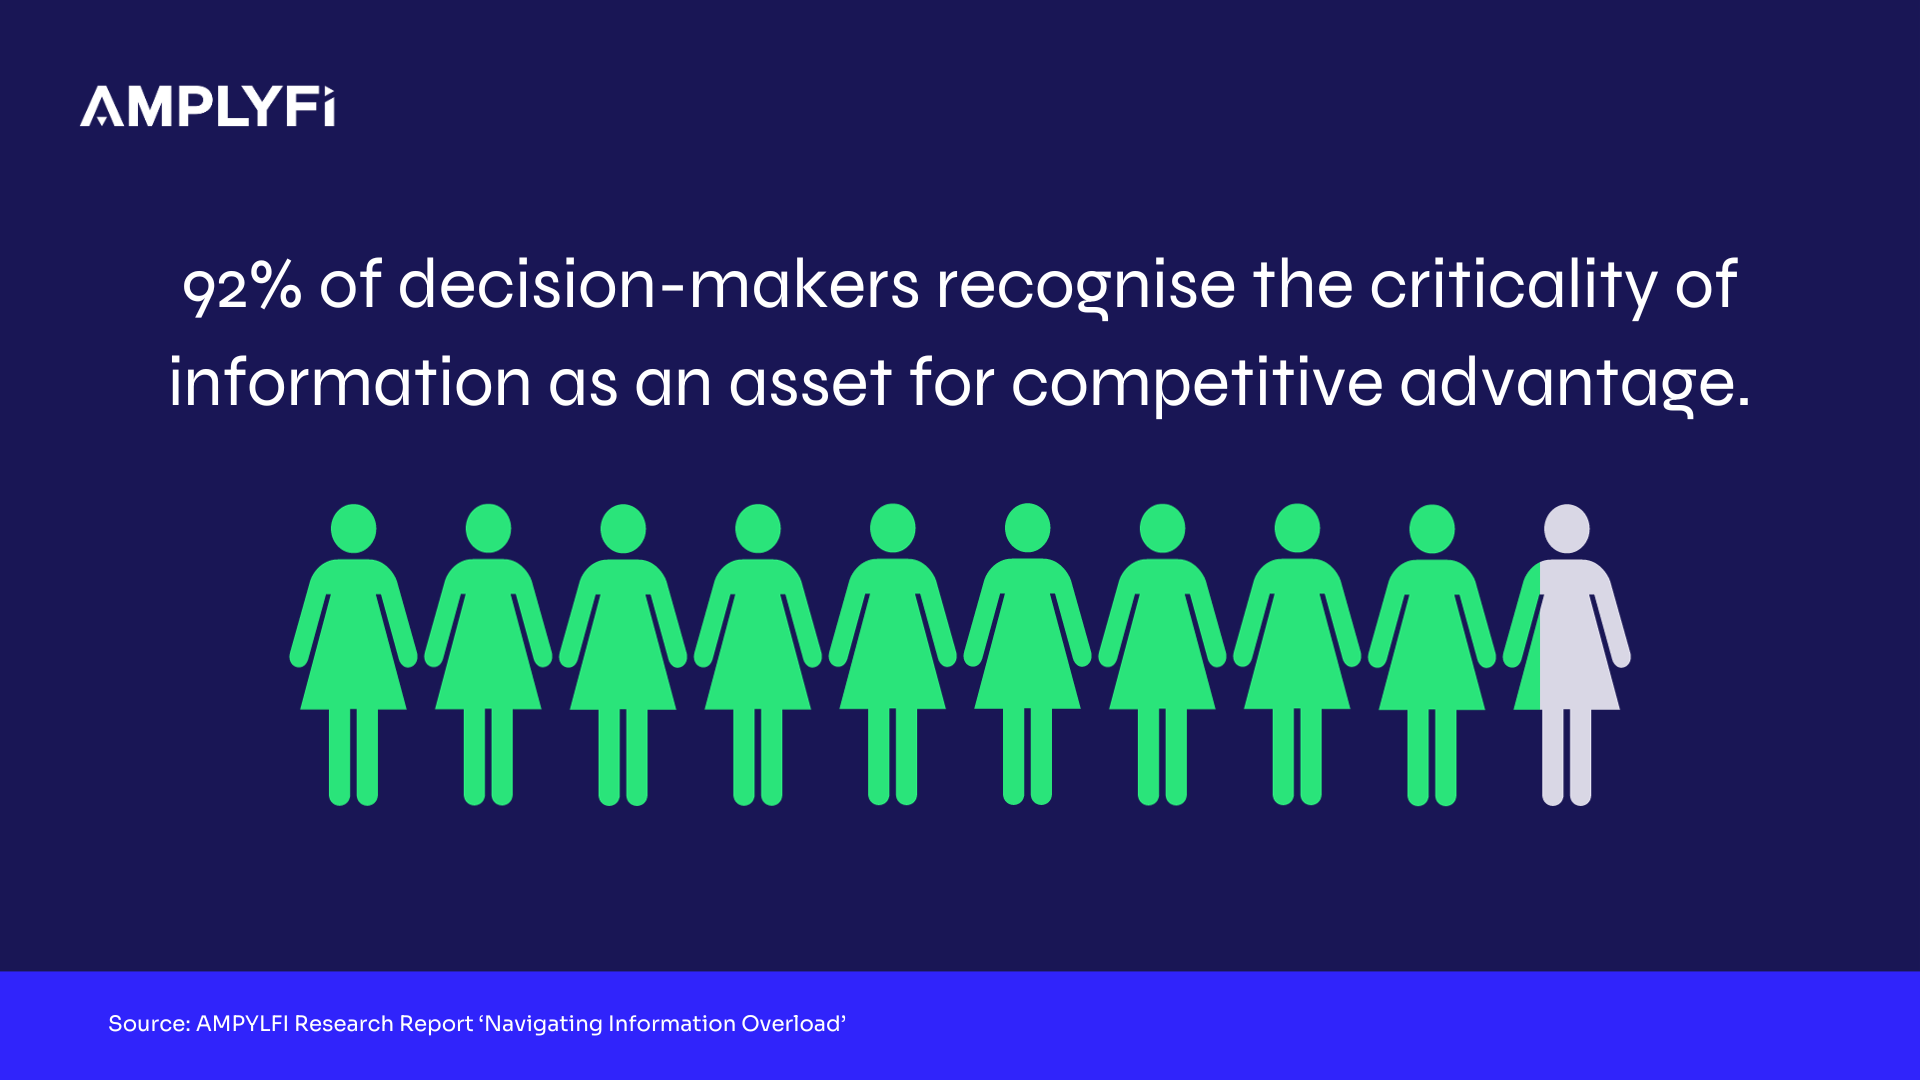 92% of decision-makers recognise the criticality of information as an asset for competitive advantage.